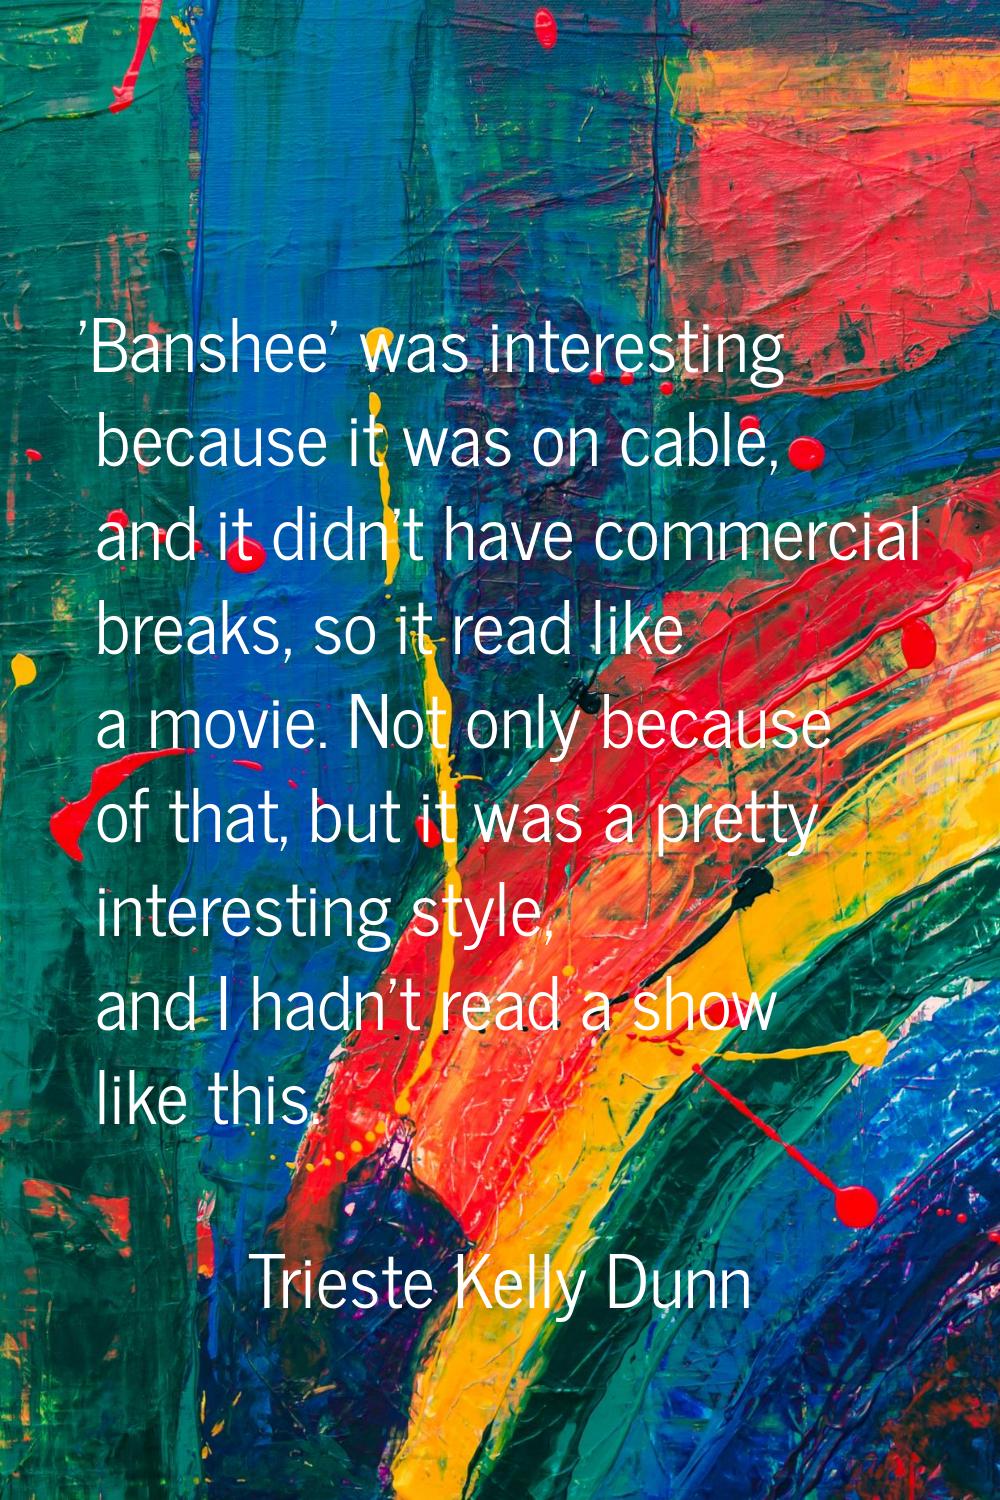 'Banshee' was interesting because it was on cable, and it didn't have commercial breaks, so it read